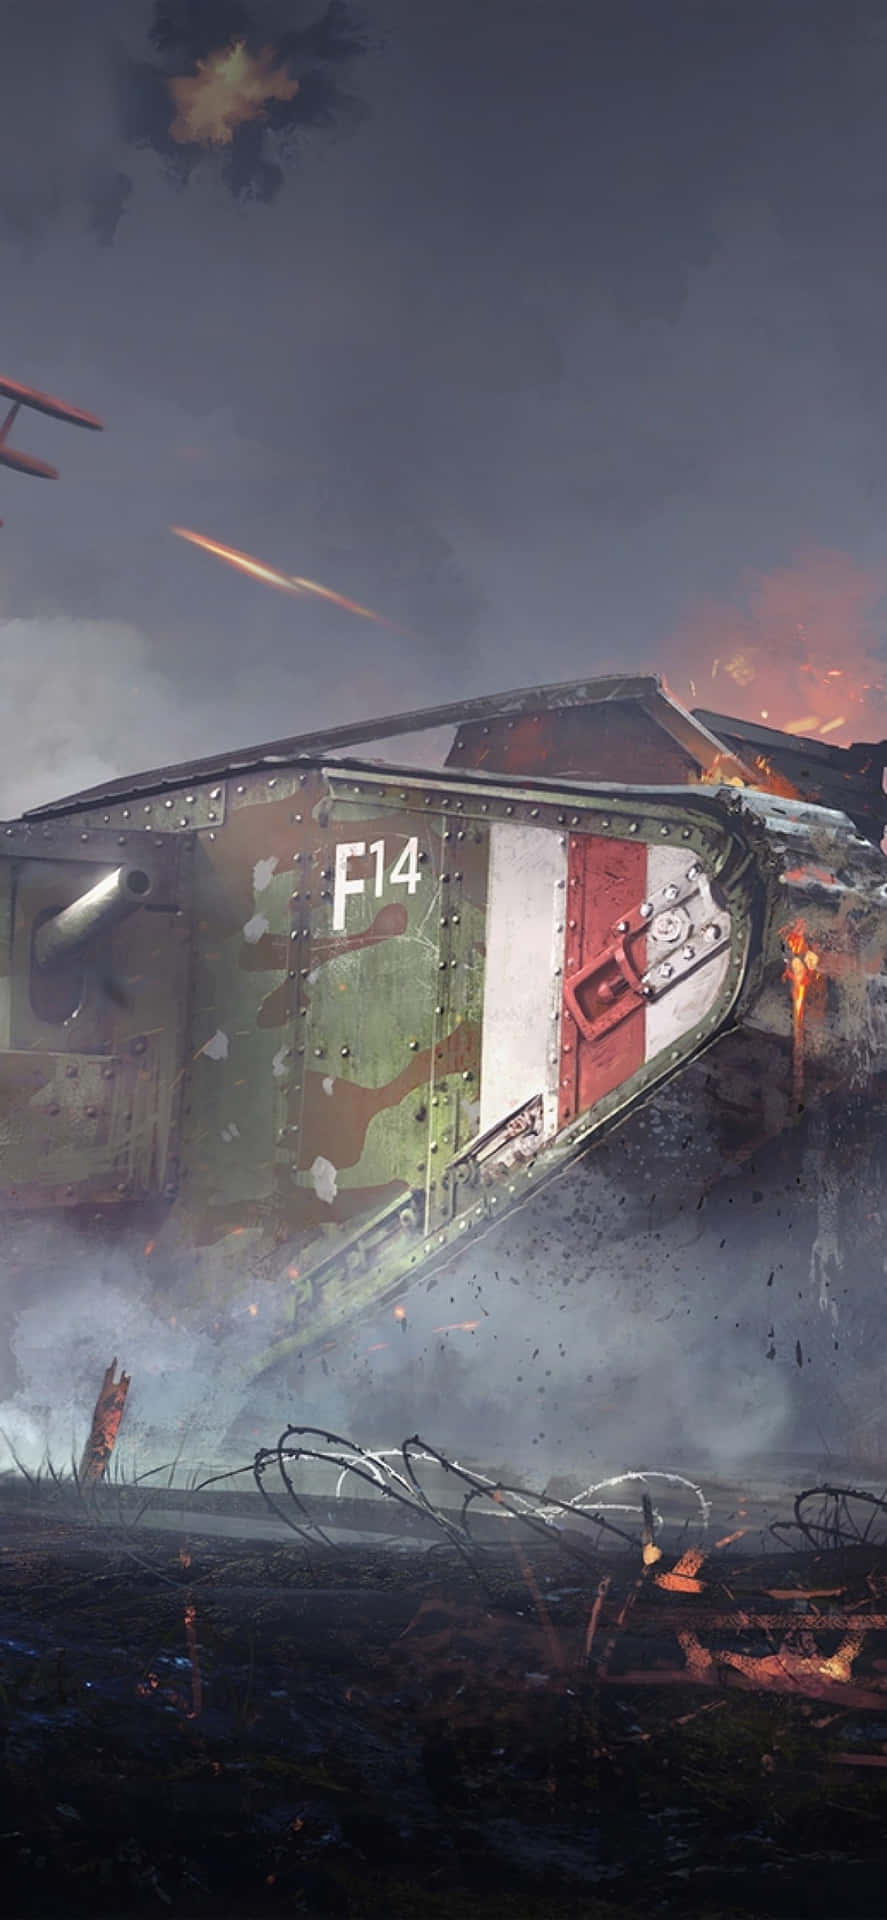 A Tank Is Flying Over A Fire Background